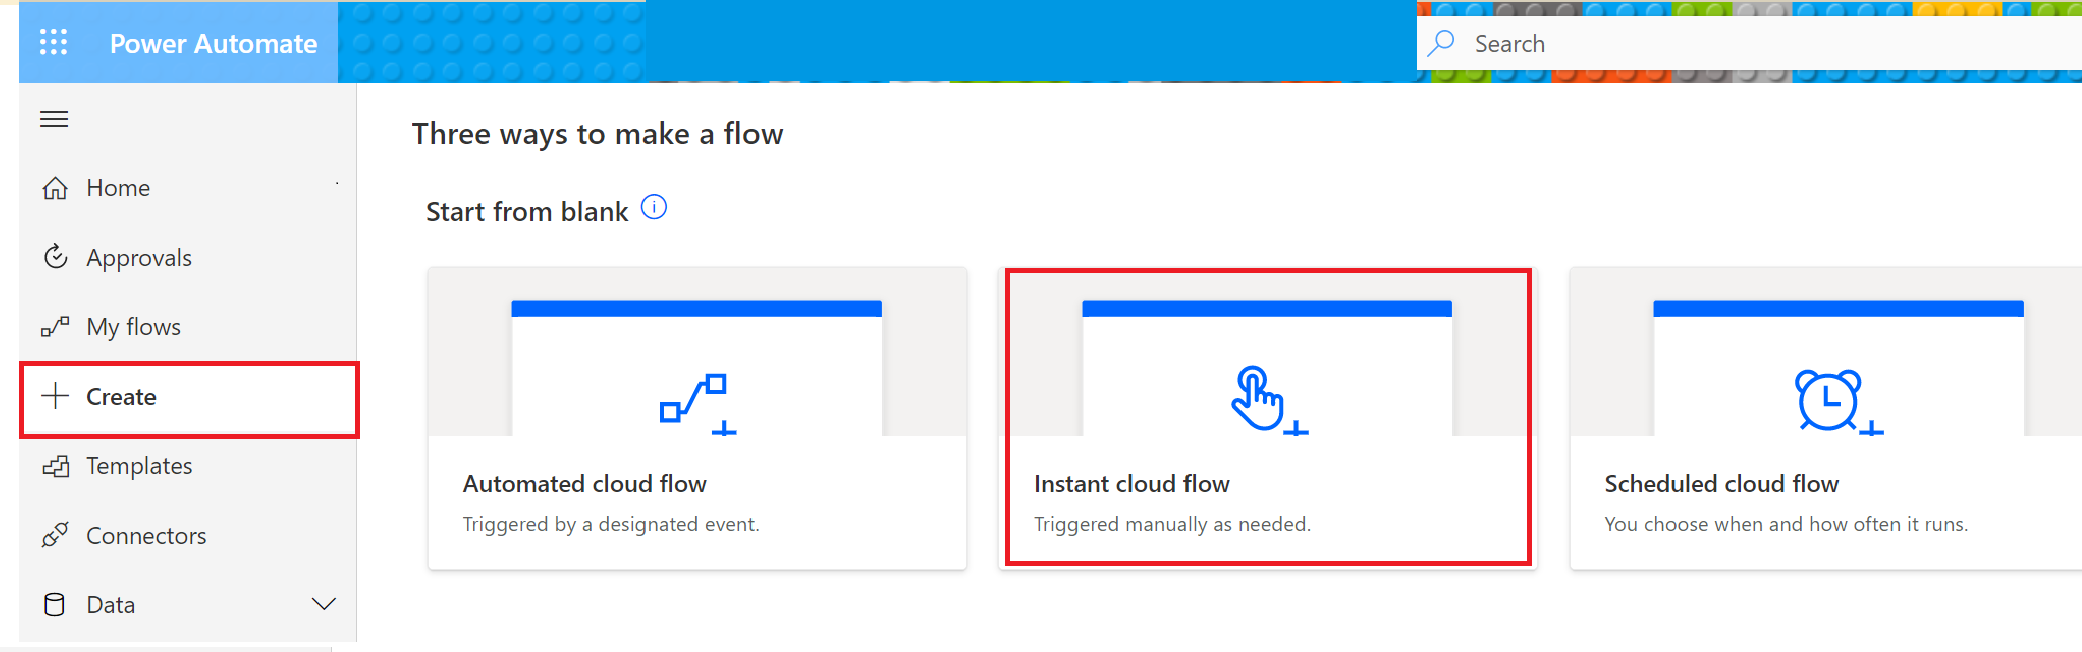 Screenshot showing how to create an instant cloud flow.